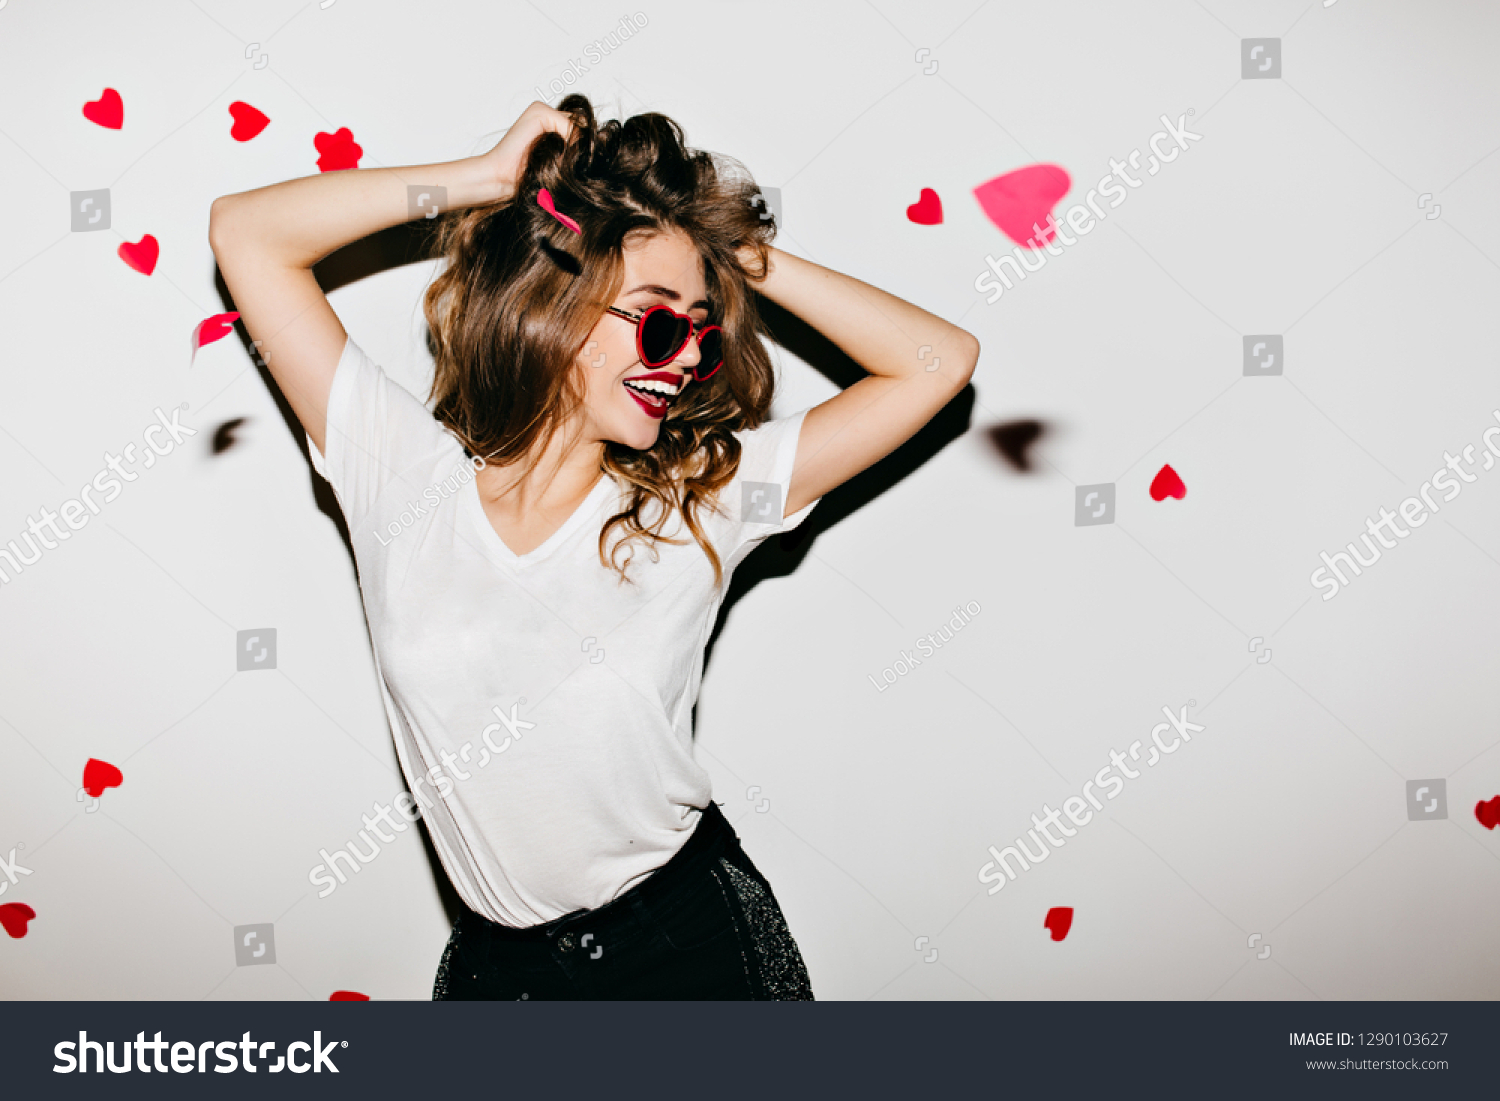 Slim european woman in glamorous sunglasses laughing on white background. Photo of good-looking girl playing with her wavy hair. #1290103627